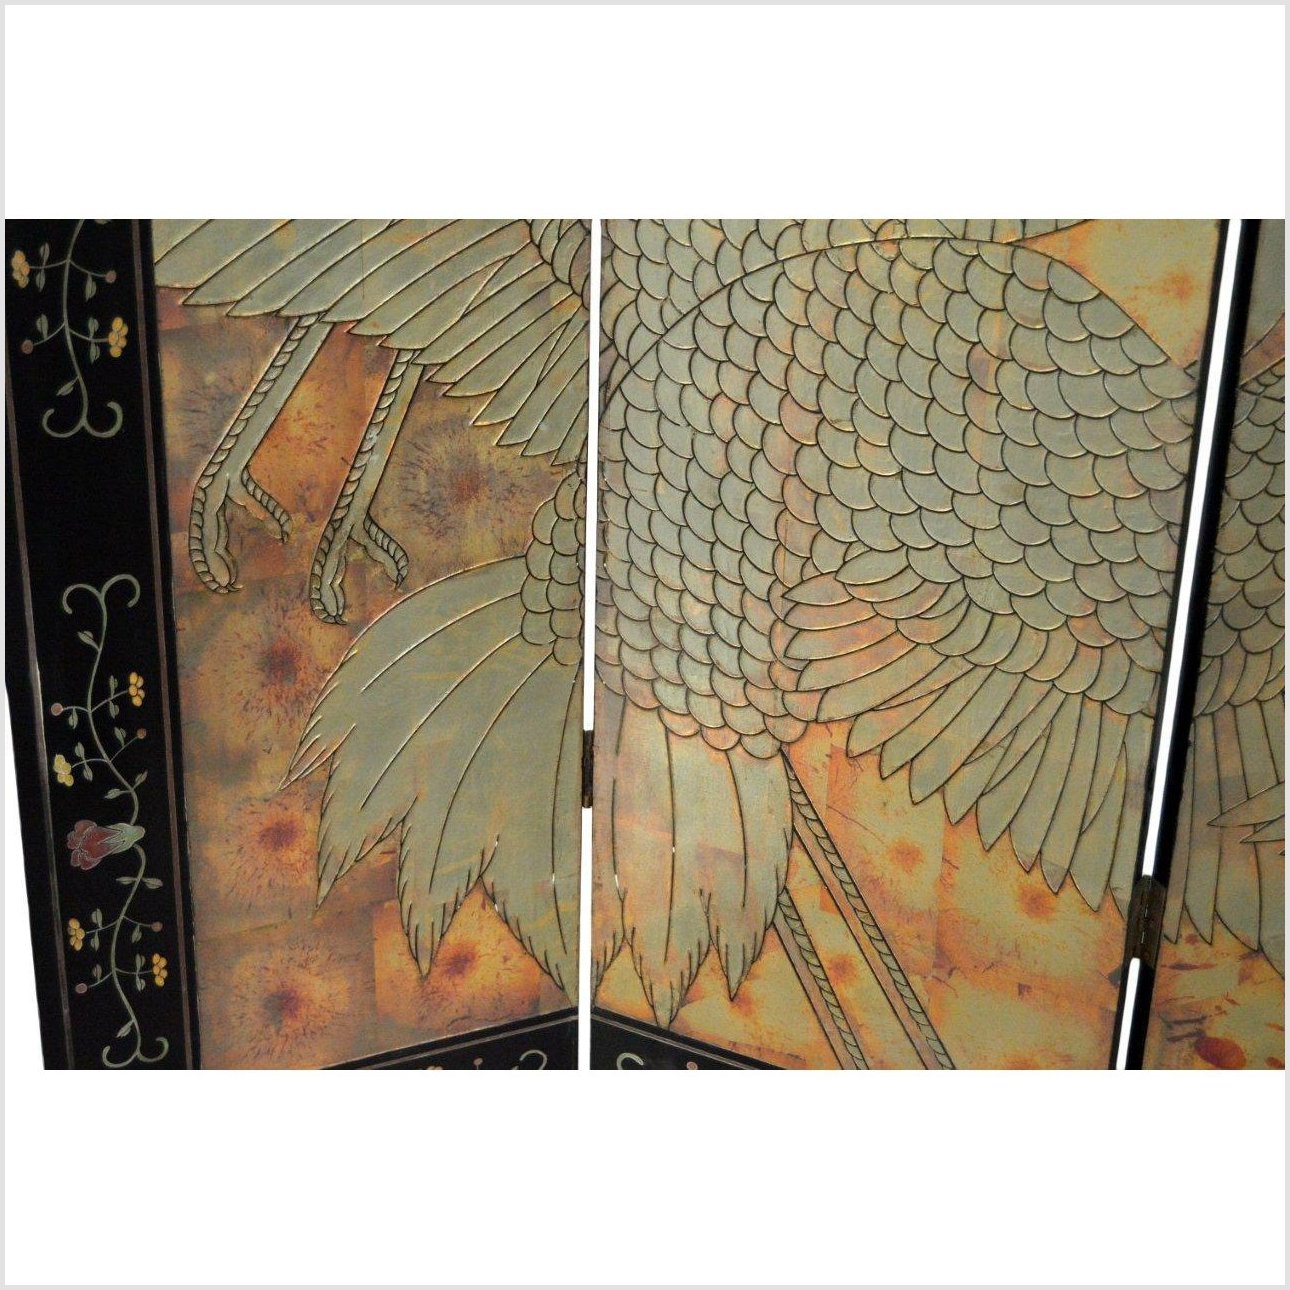 6-Panel Screen Depicting Cranes in Gold, Jade and Black Tones-YN2789-10. Asian & Chinese Furniture, Art, Antiques, Vintage Home Décor for sale at FEA Home